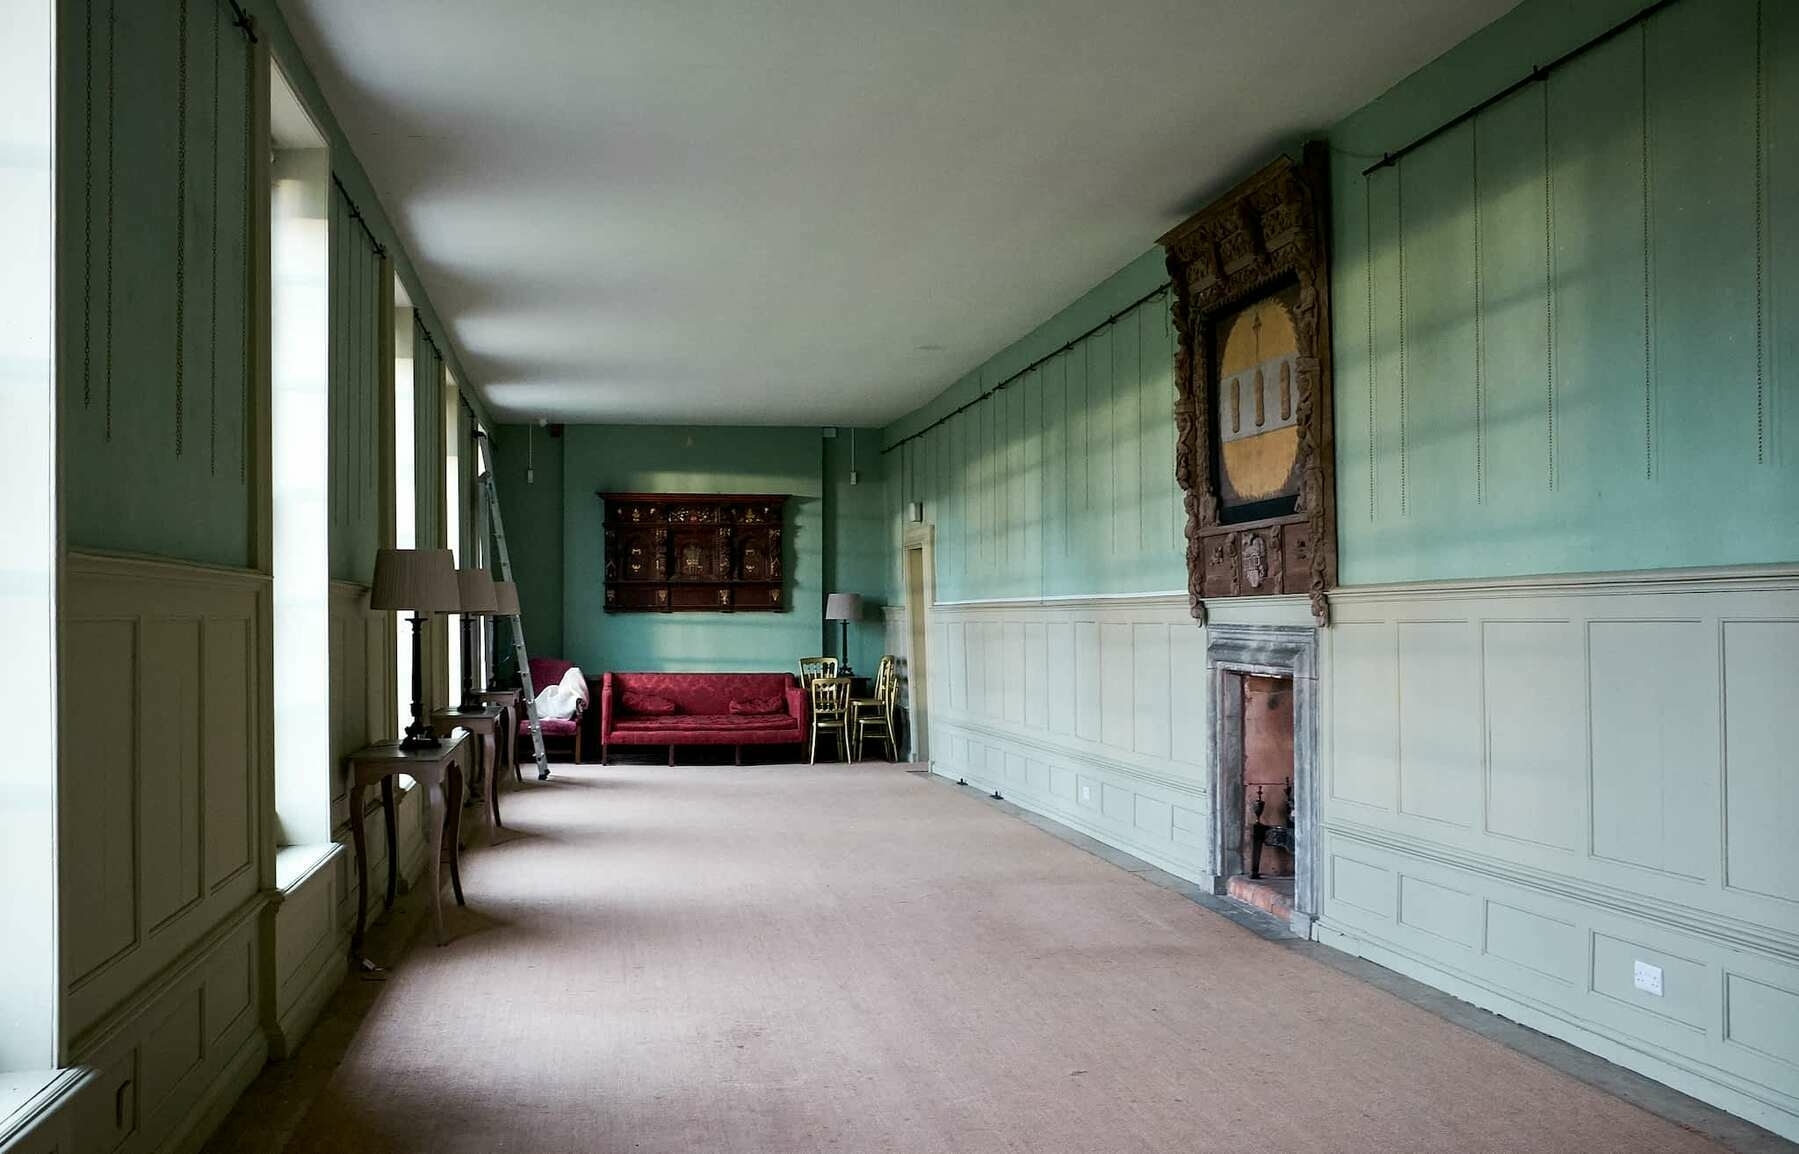 A view down a long empty gallery room. Winter light enters from windows on the left. The walls are painted a soft robin's egg blue colour, and there is a red sofa at the far end of the room.